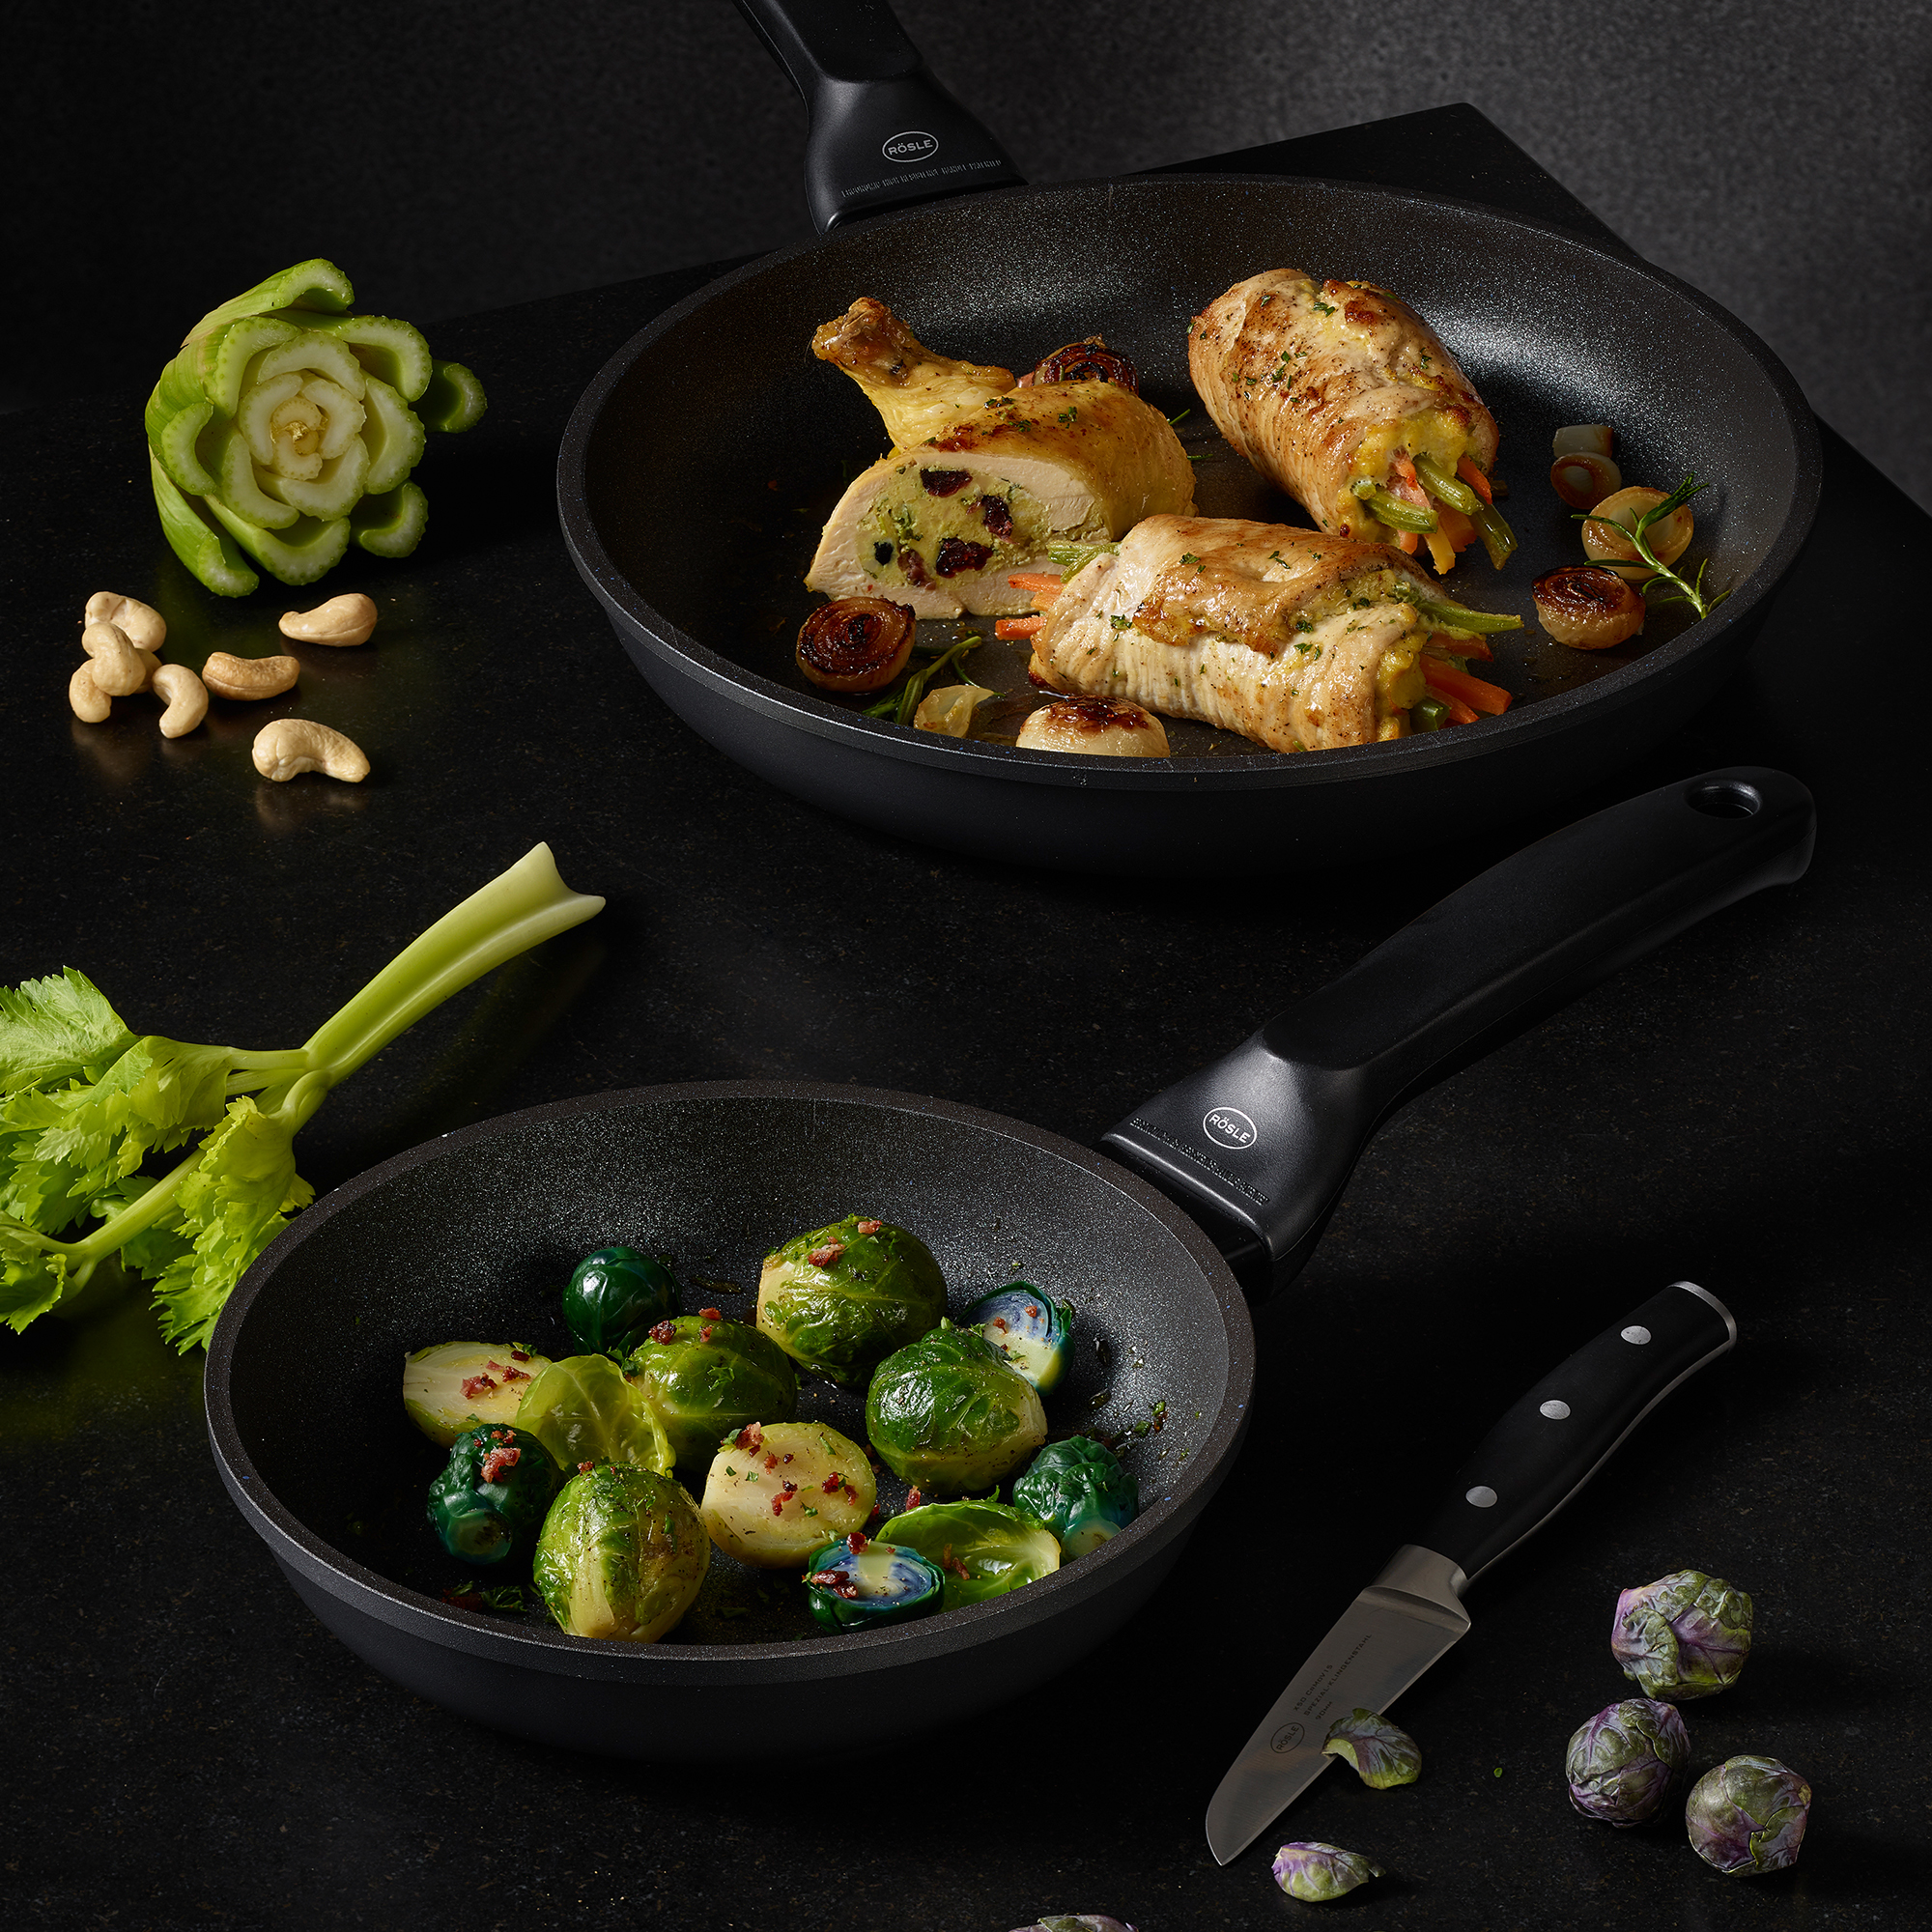 Frying Pan "Cadini" Ø 28 cm | 11.0 in. from cast aluminum with non-stick coating ProResist®